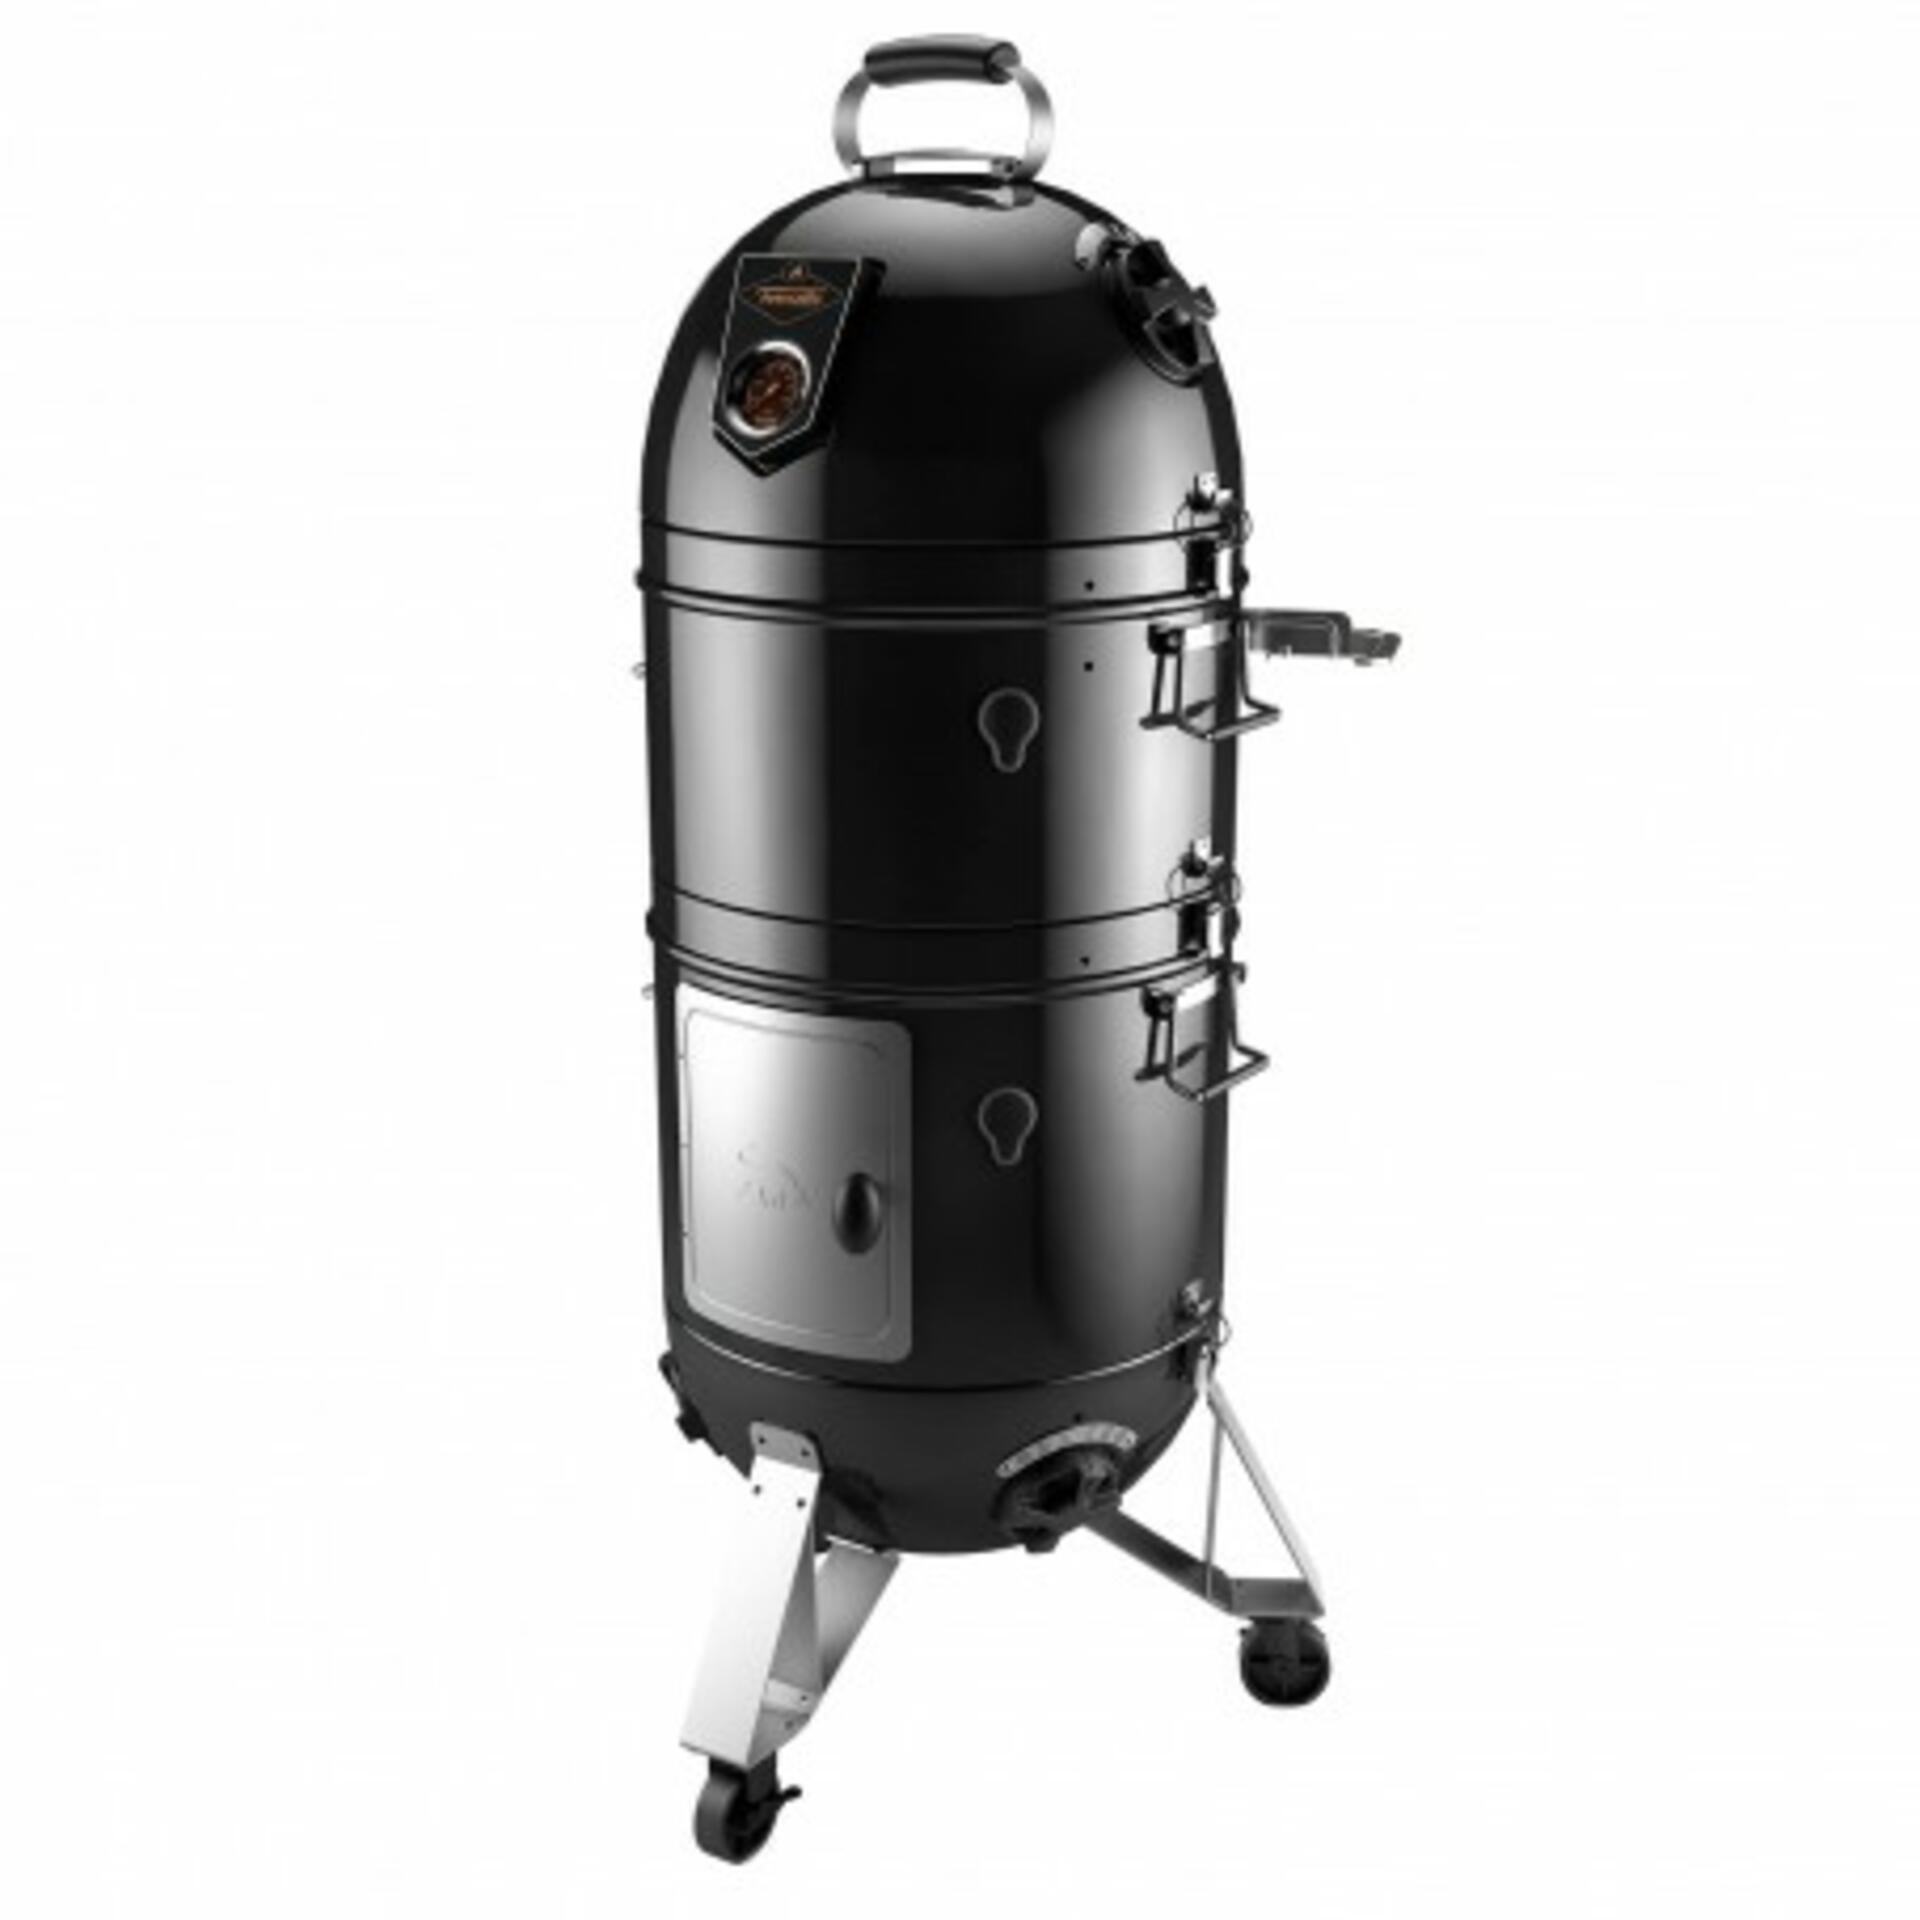 Caliano 6.1 Gas BBQ with Pizza Oven